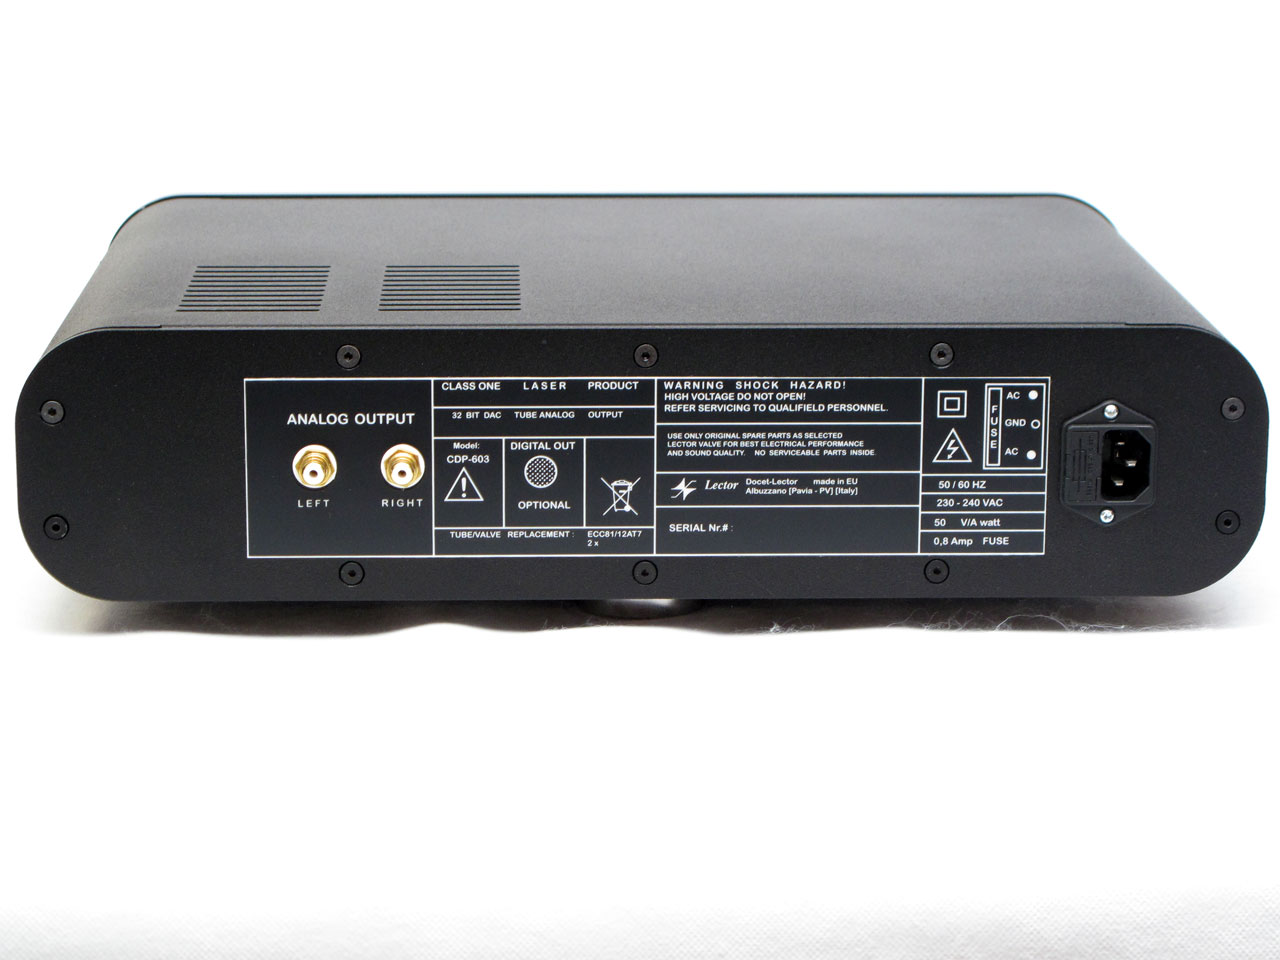 Lector Frontloader-CD-Player CDP-603 